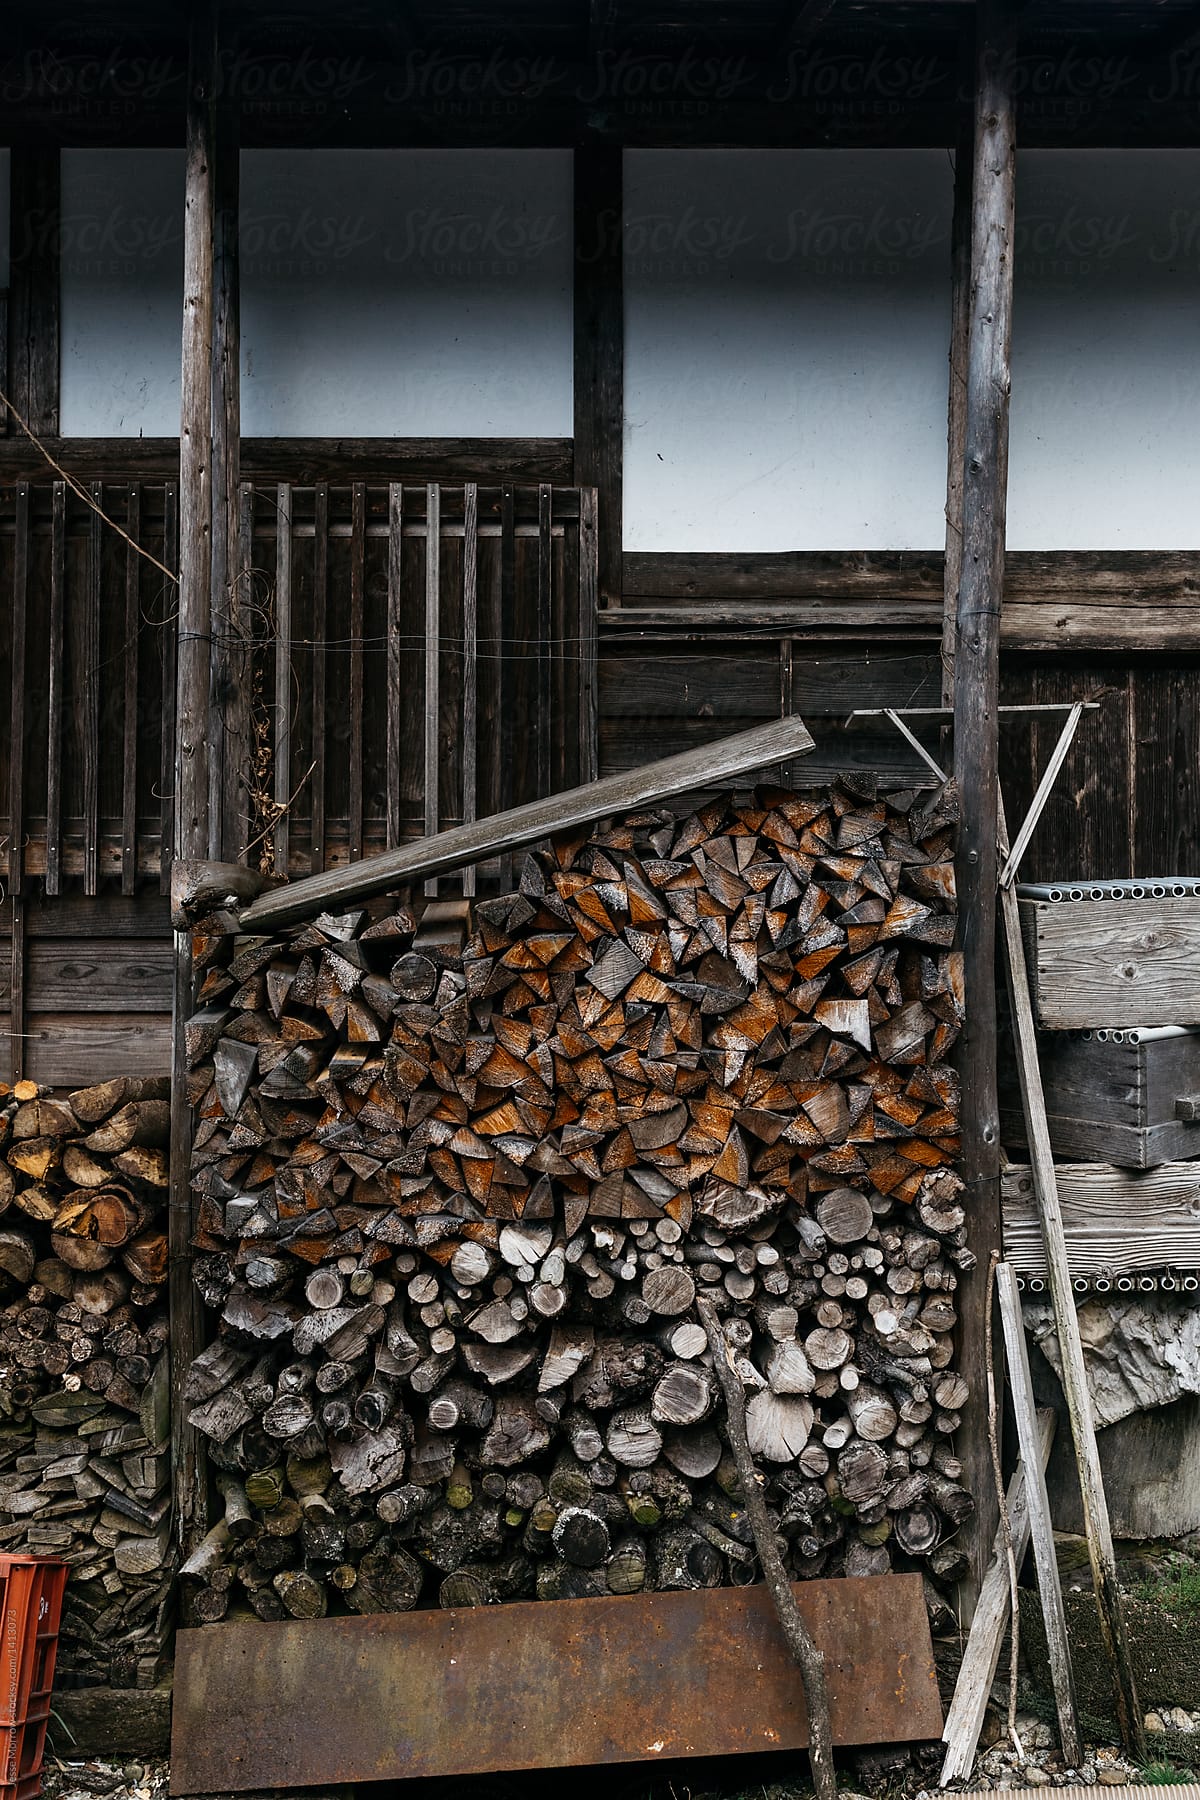 wood stack decor for burning fuel outside traditional japanese home in remote region japan